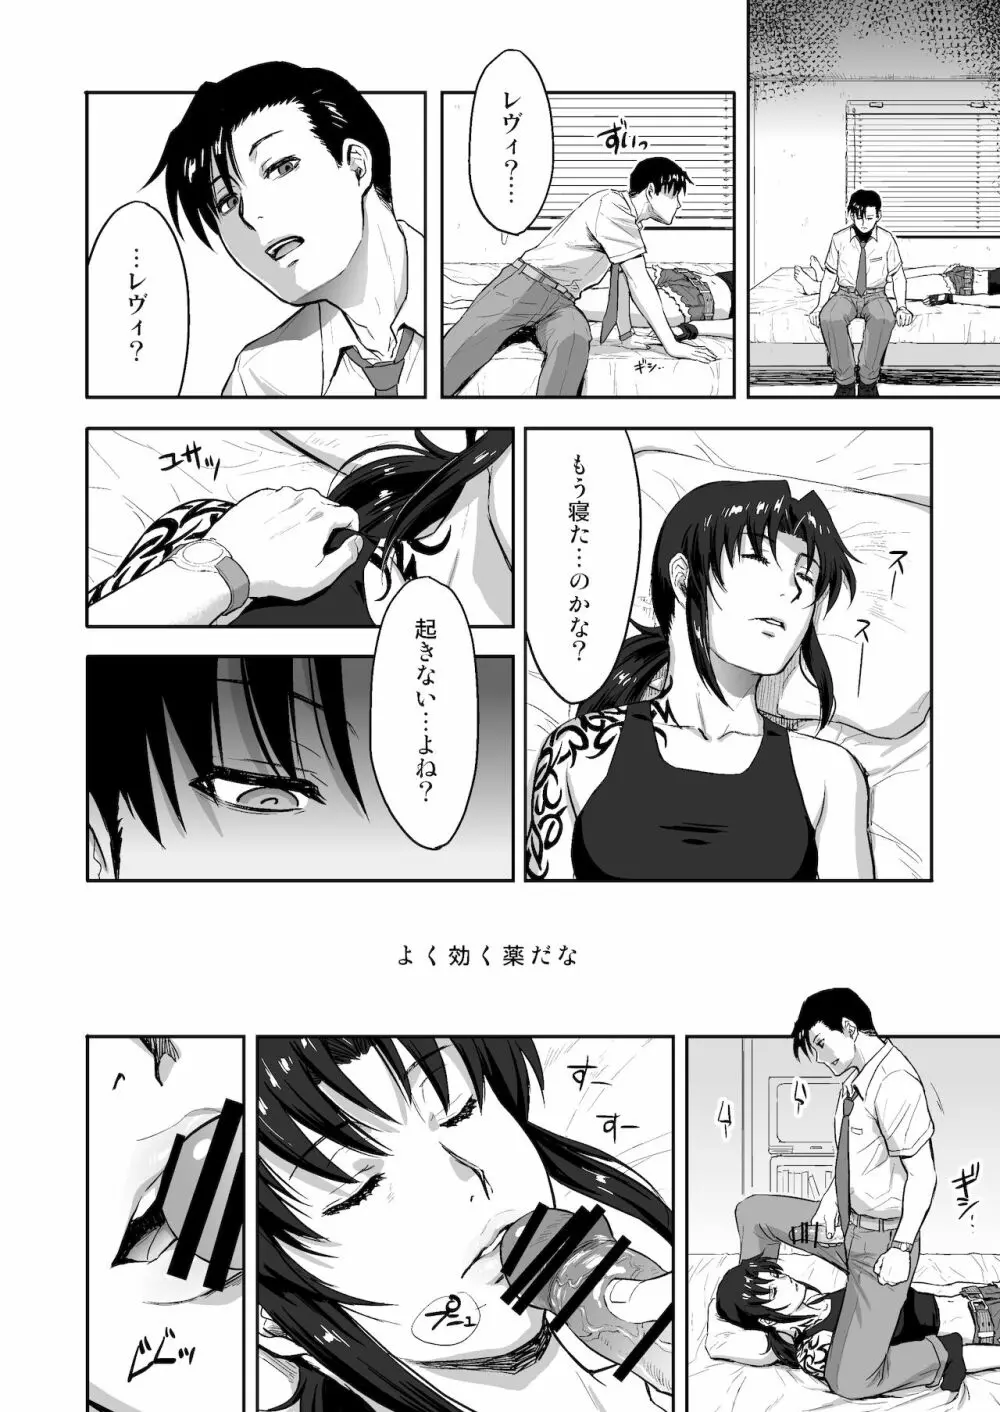 SLEEPING Revy - page7